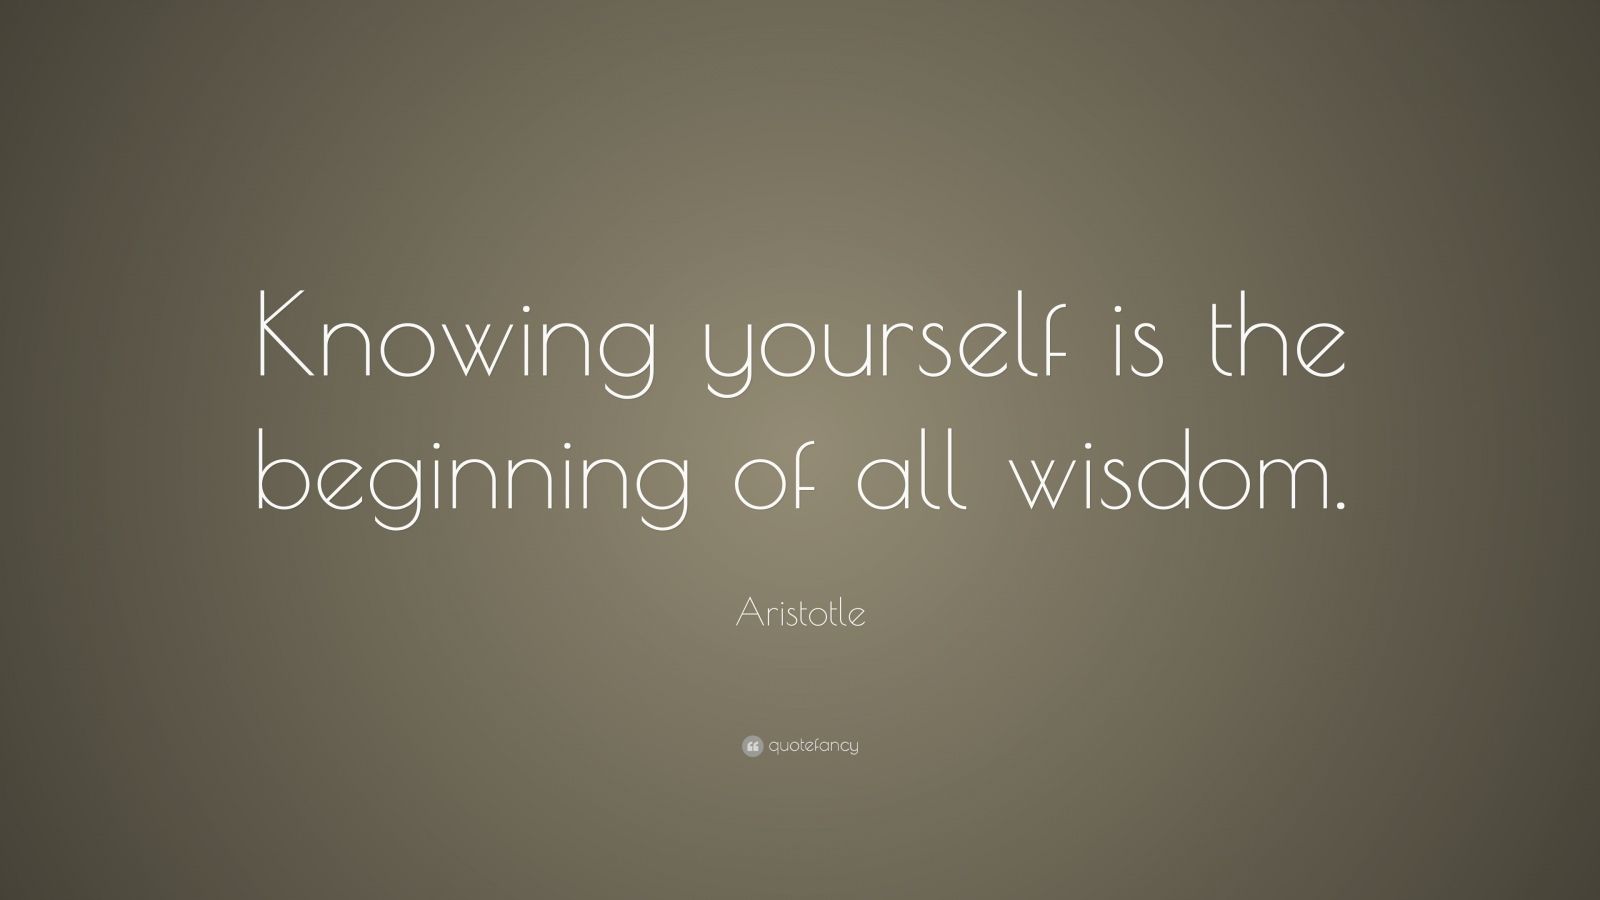 knowing yourself is the beginning of all wisdom meaning essay